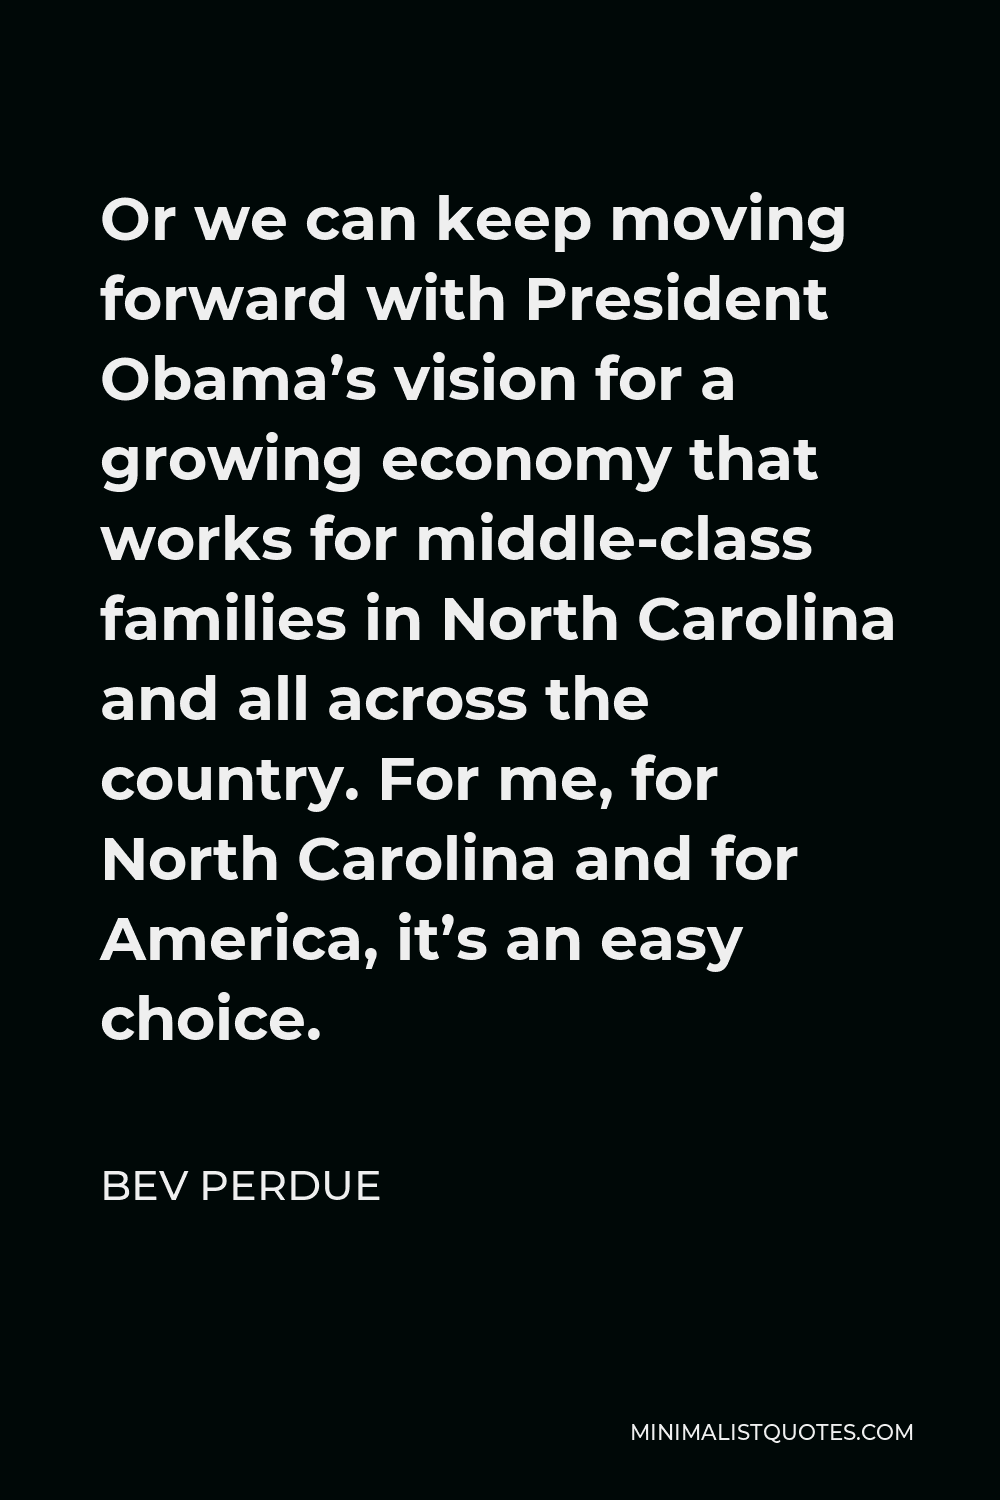 Bev Perdue Quote - Or we can keep moving forward with President Obama’s vision for a growing economy that works for middle-class families in North Carolina and all across the country. For me, for North Carolina and for America, it’s an easy choice.